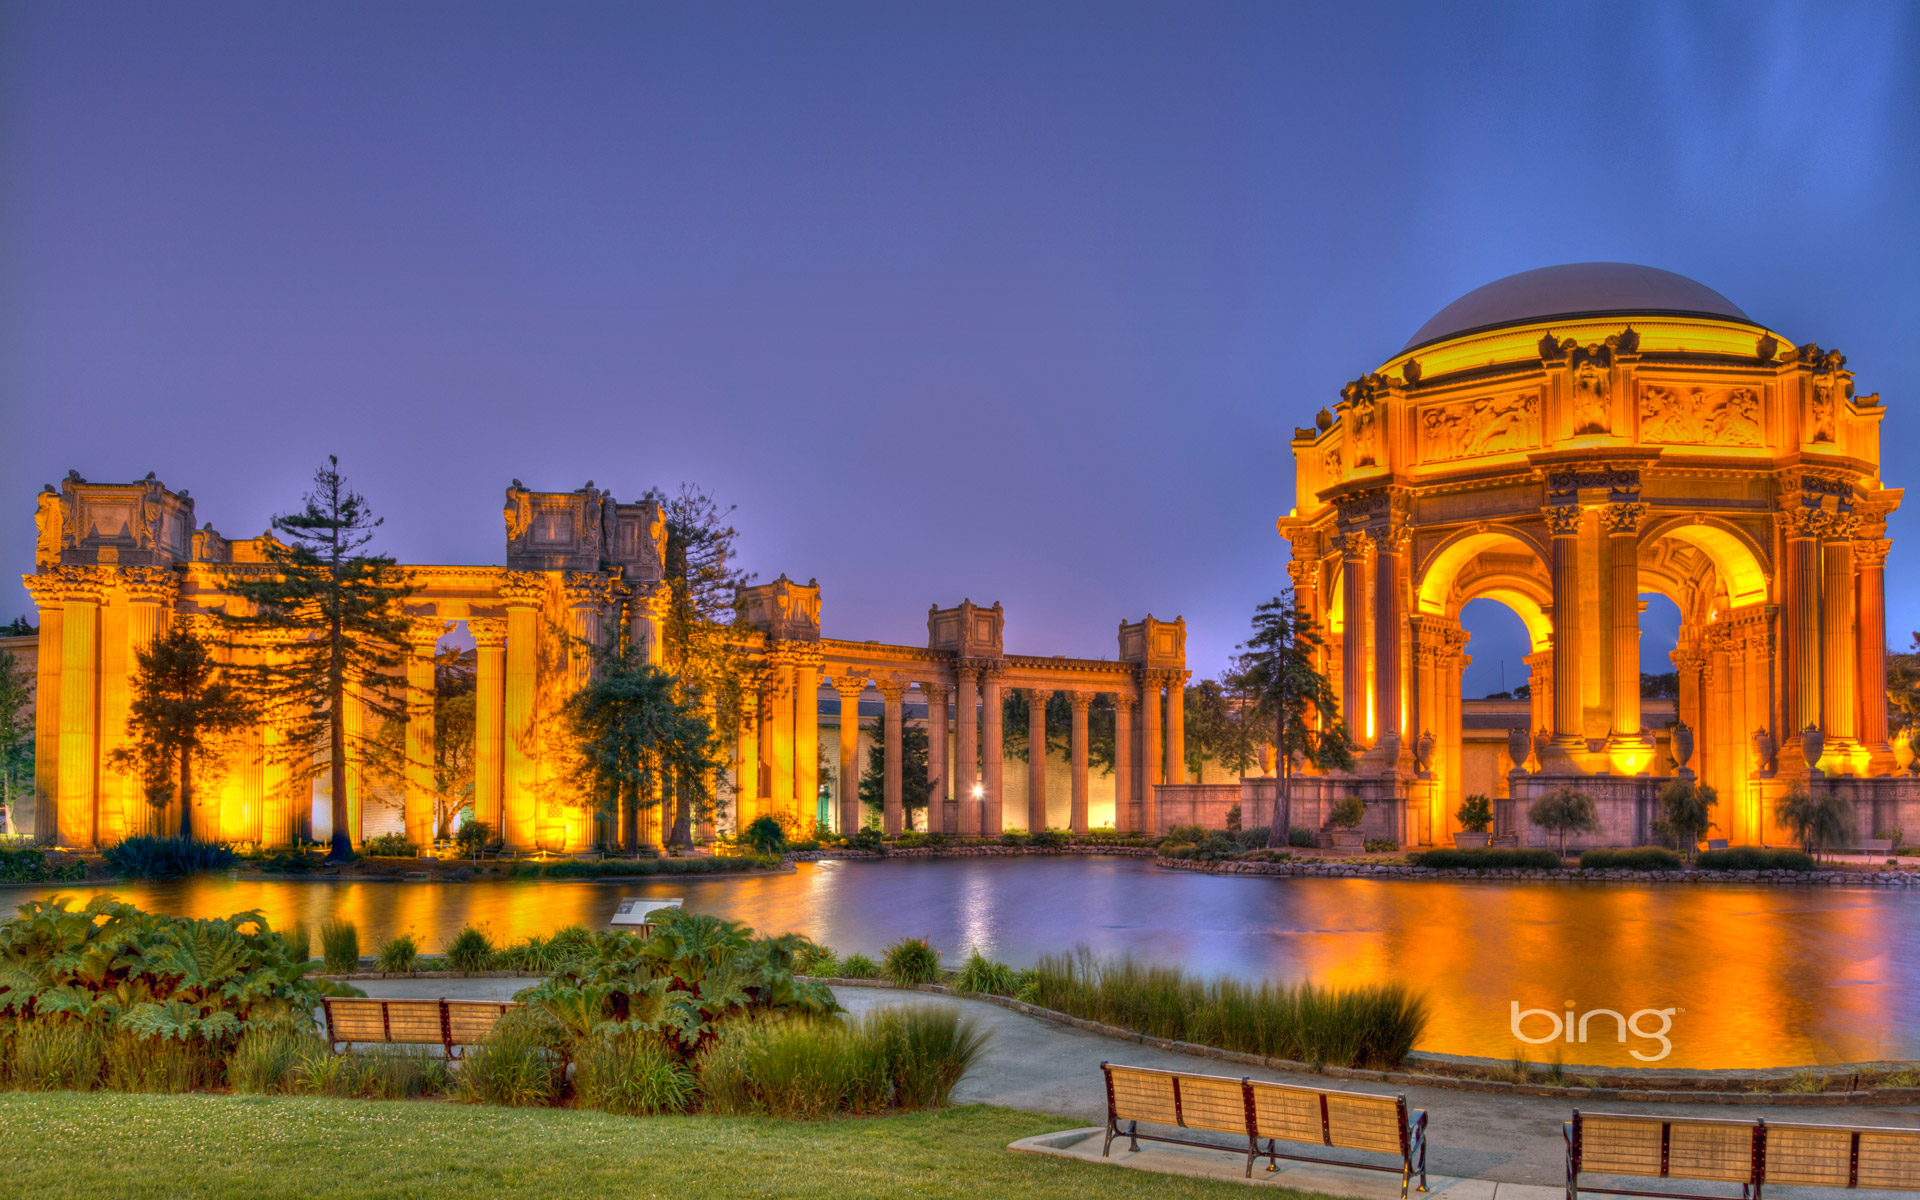 man made, palace of fine arts, architecture, building, palace, san francisco, monuments